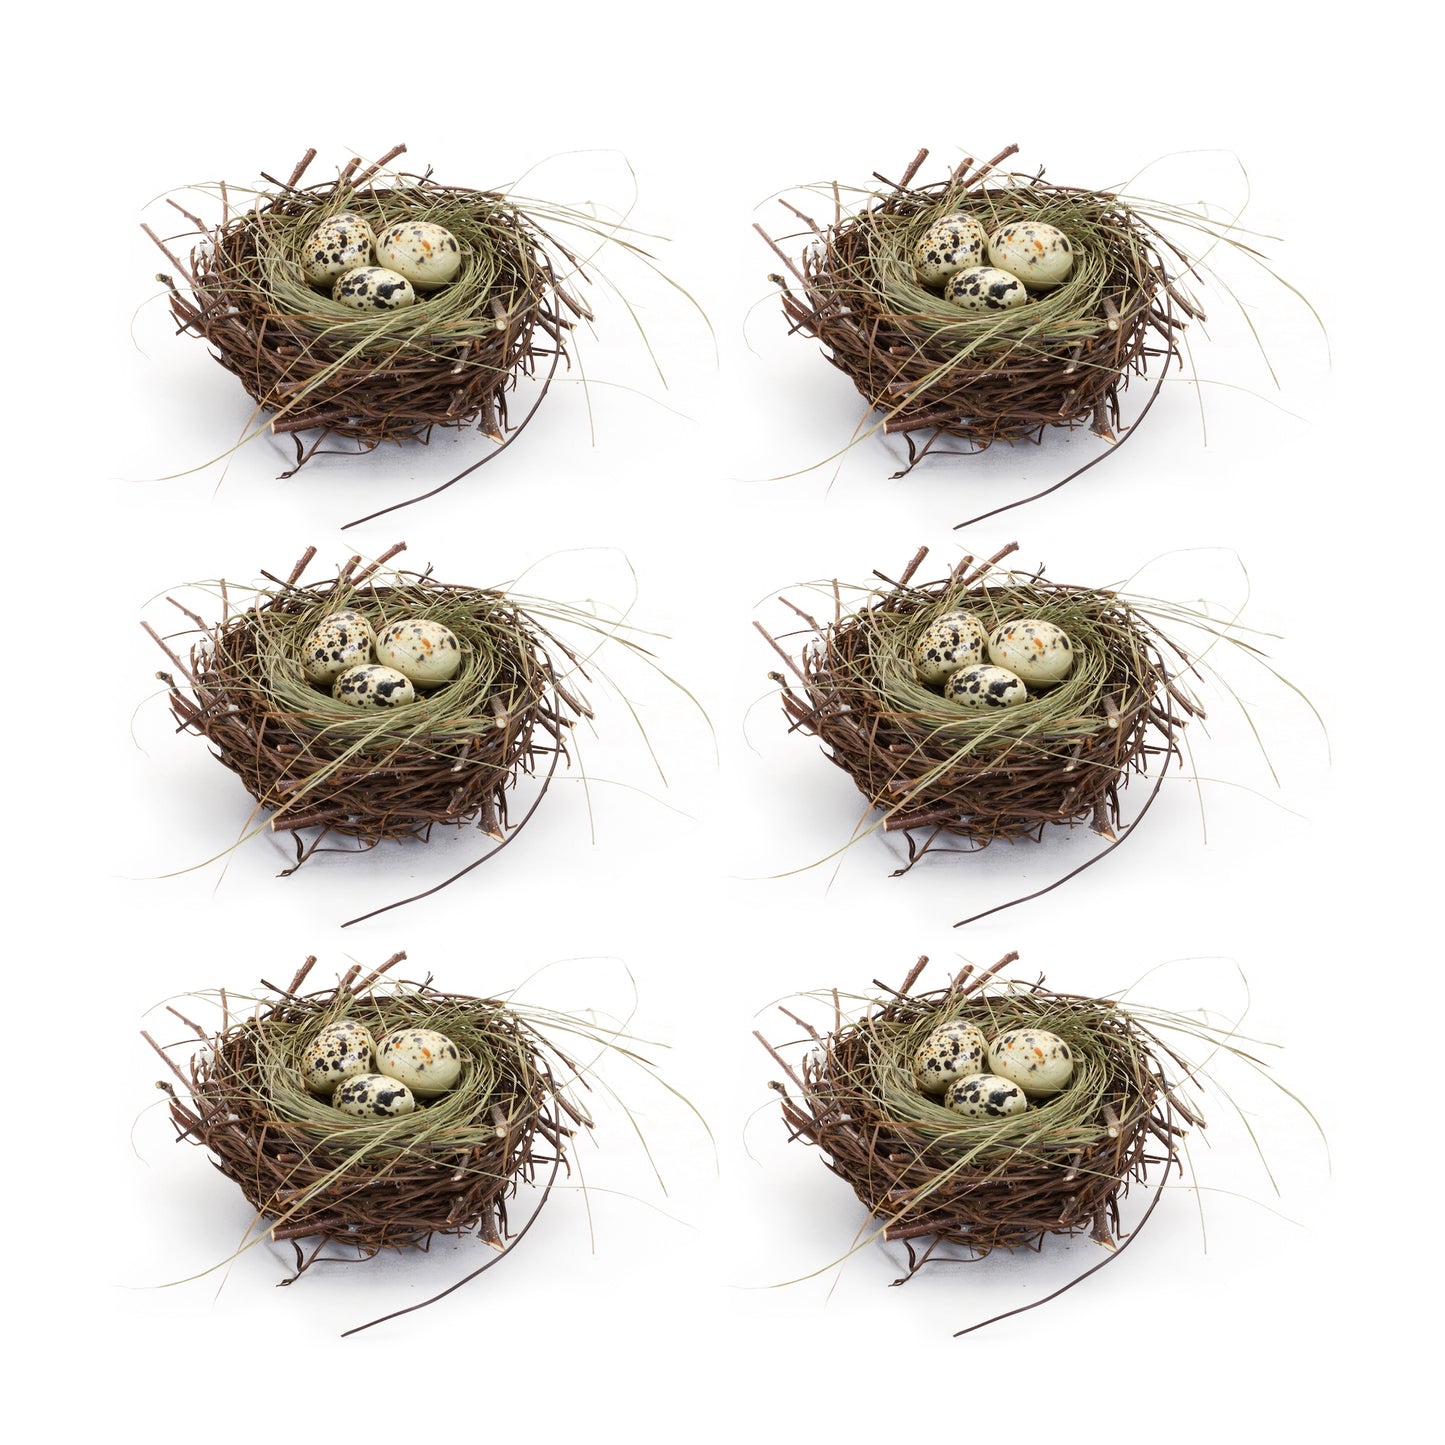 Nest with Eggs (Set of 6) 6"D x 2.5"H Natural/Foam